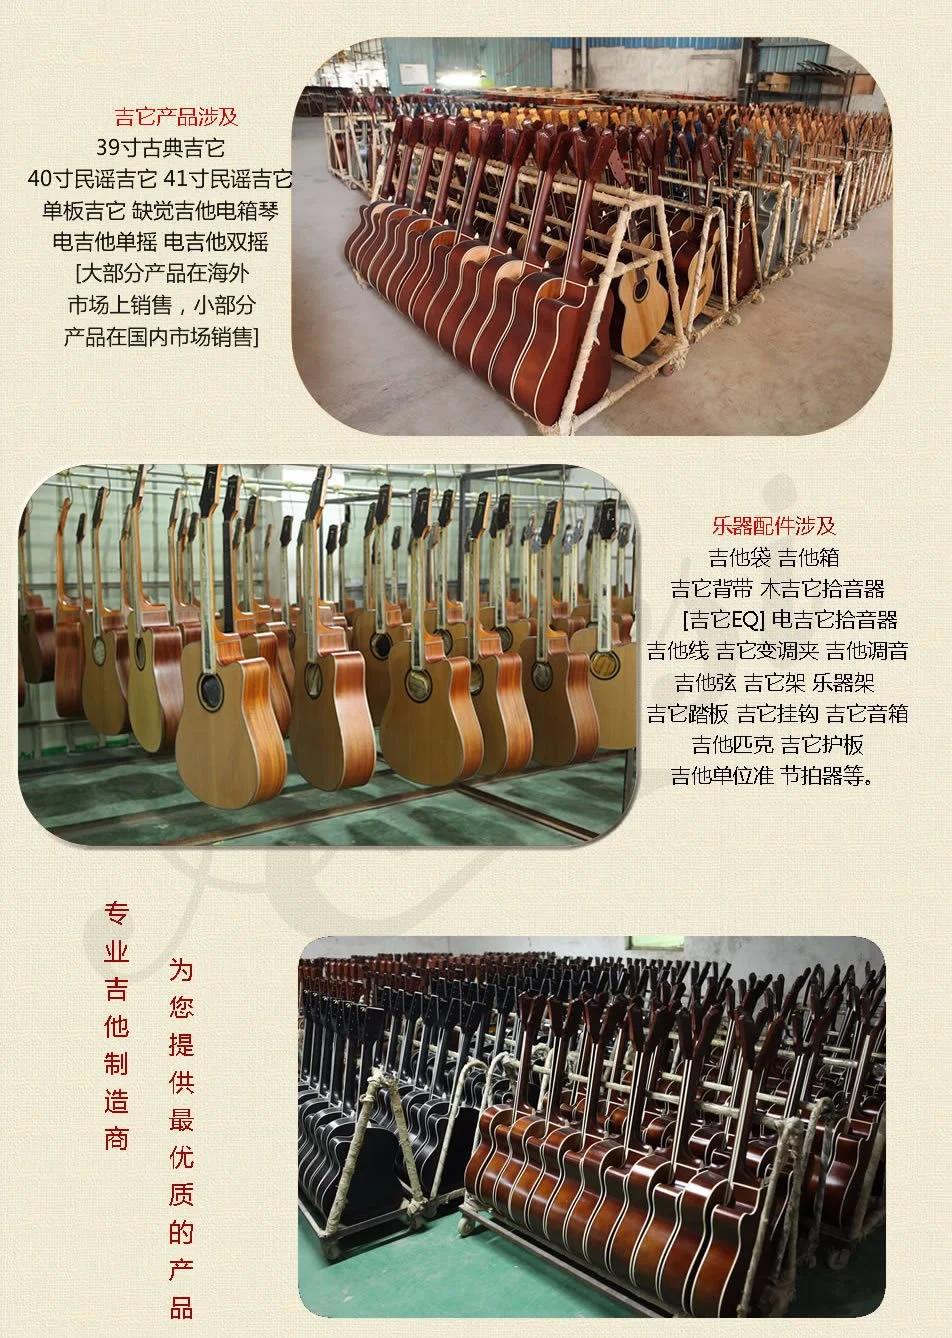 New Arrival Chinese Classical Guitar Fast Delivery